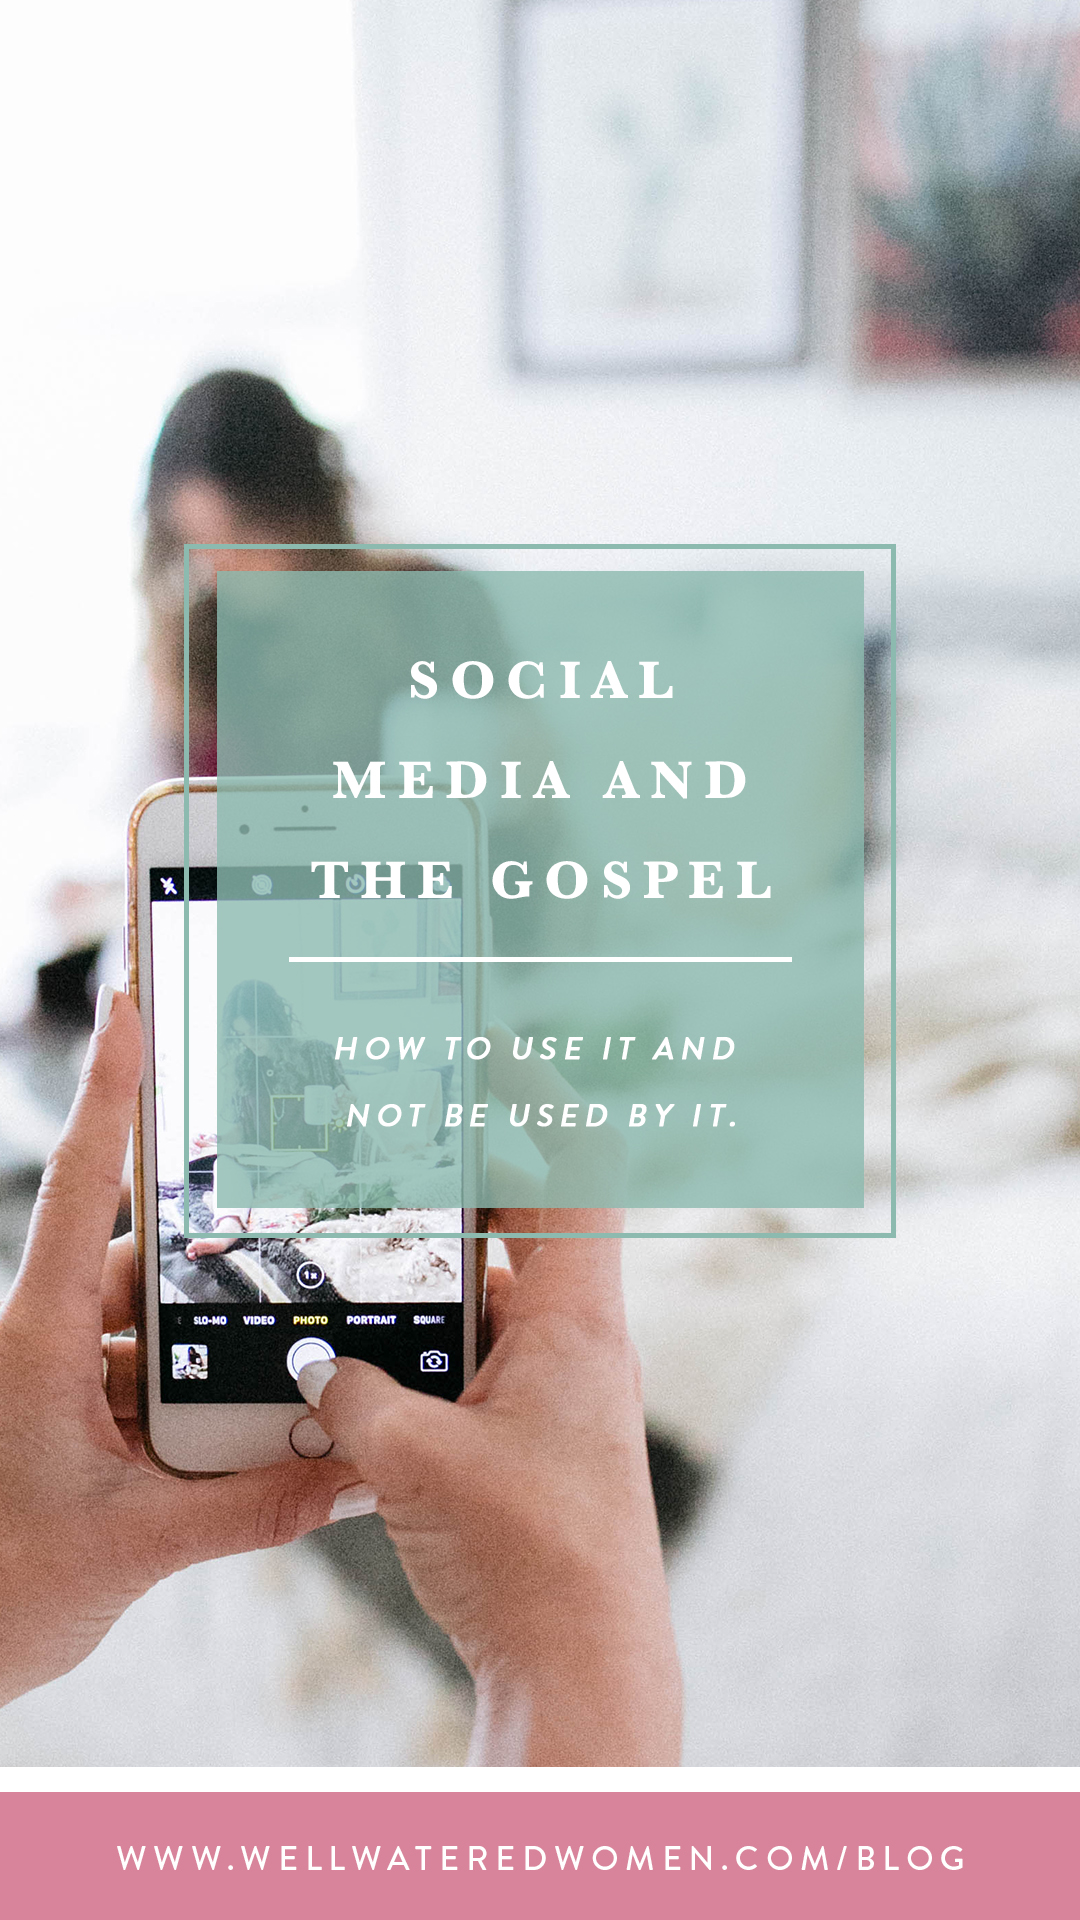 Social Media and the Gospel: How to USE it and NOT be USED by it. Ask yourself: Why does my heart lean toward comparison? Why am I so prone to envy the lives of others when I see their pictures on social media? Why do I anxiously strive to take glory for myself?